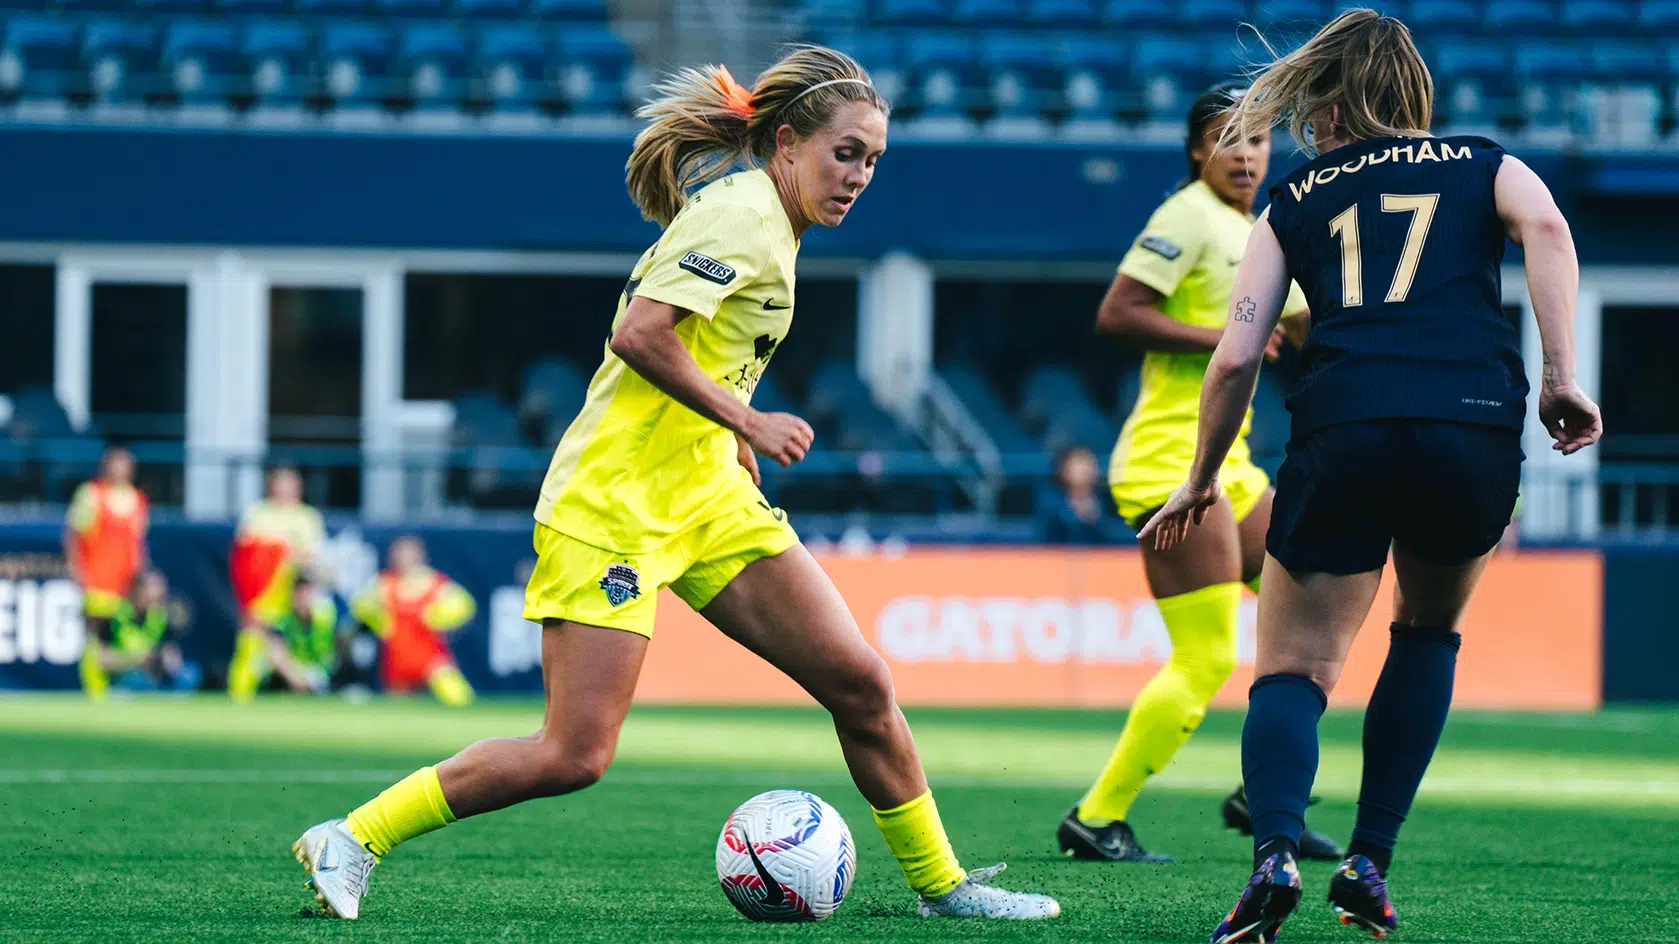 Brittany Ratcliffe dribbles a soccer ball towards a Seattle Reign defender. Brittany is wearing a neon yellow Spirit kit with her hair in a ponytail and orange ribbon.